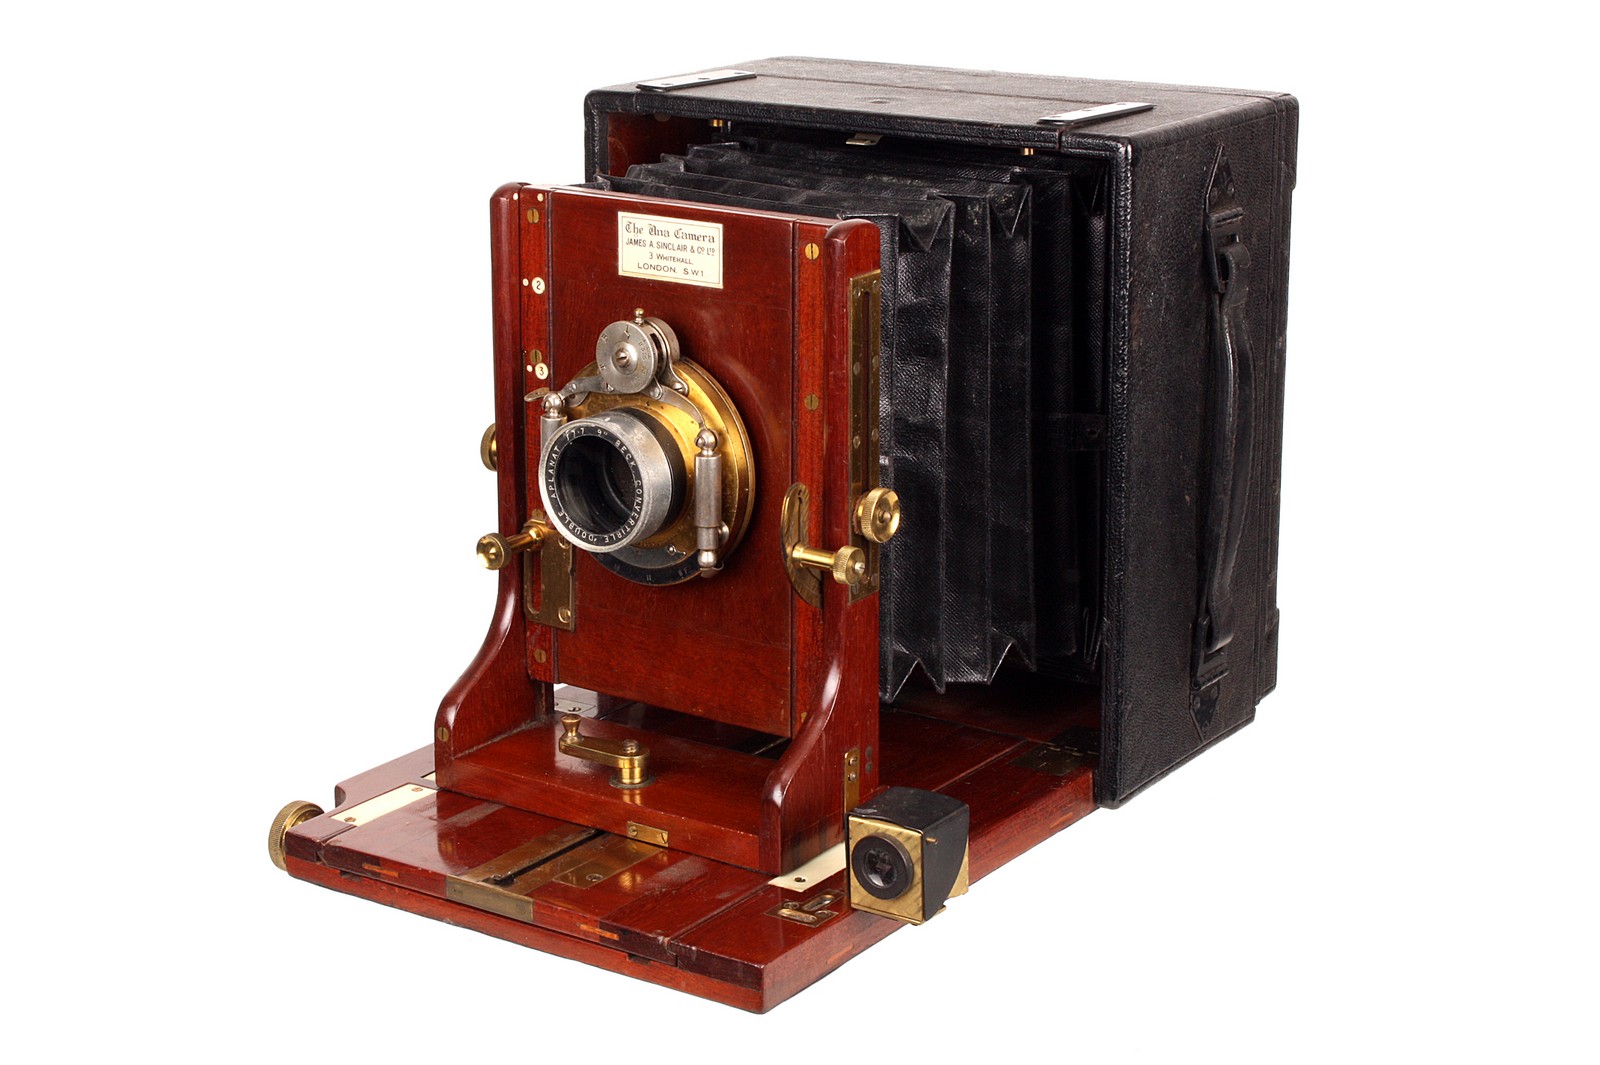 A James A. Sinclair Una Hand Camera, 4½x6¼”, with Beck Convertible Double Aplanat f/7.7 9” lens,